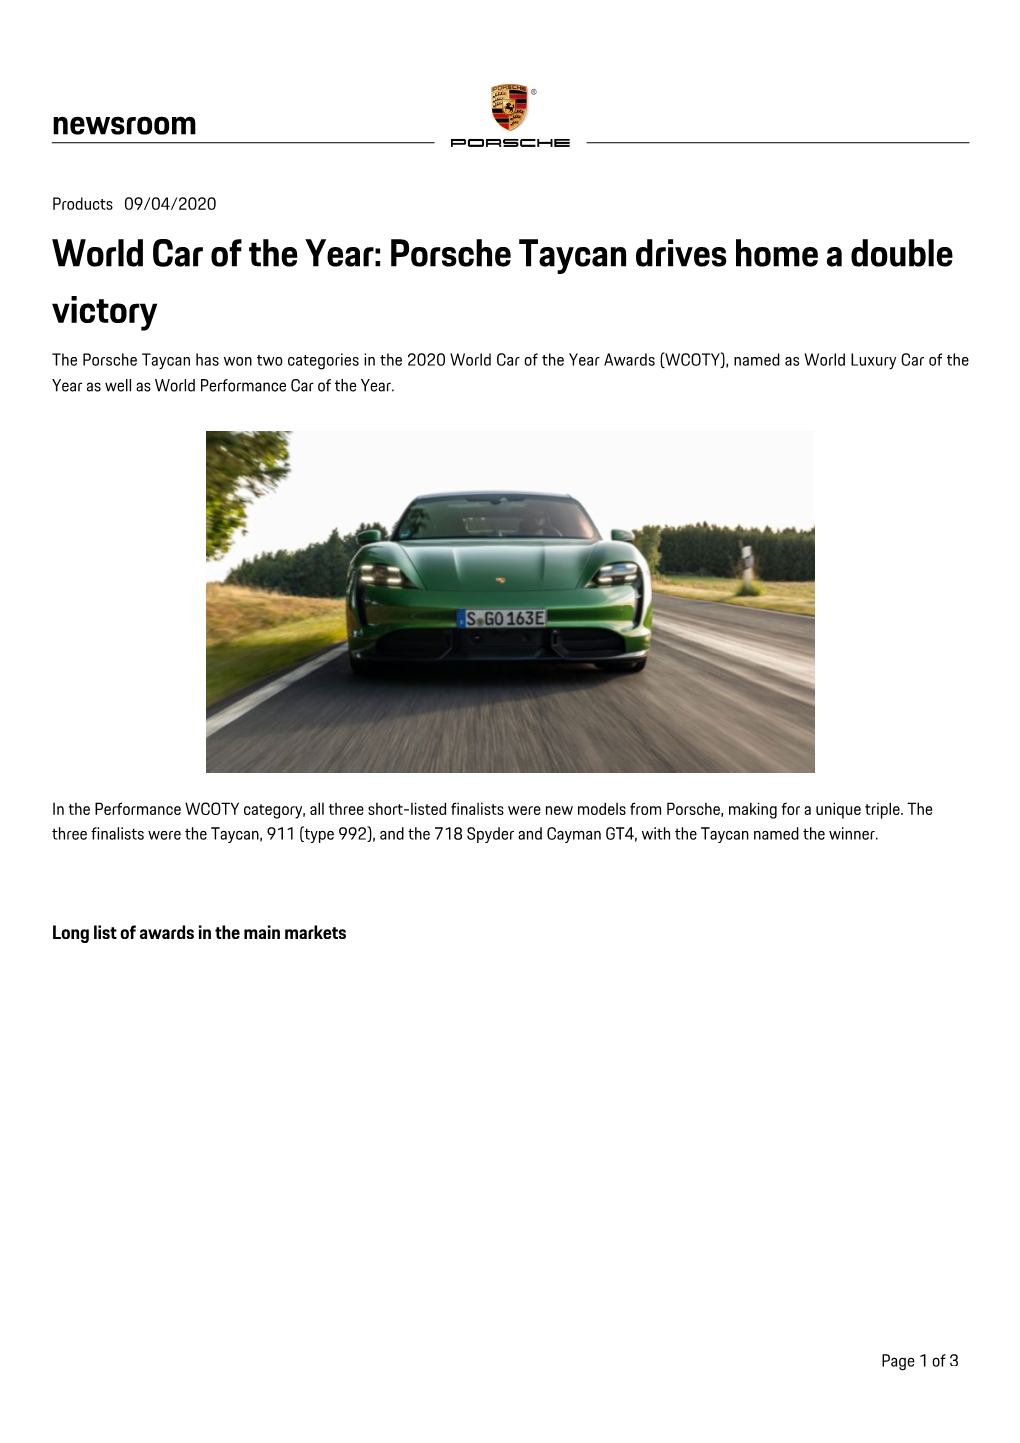 World Car of the Year: Porsche Taycan Drives Home a Double Victory